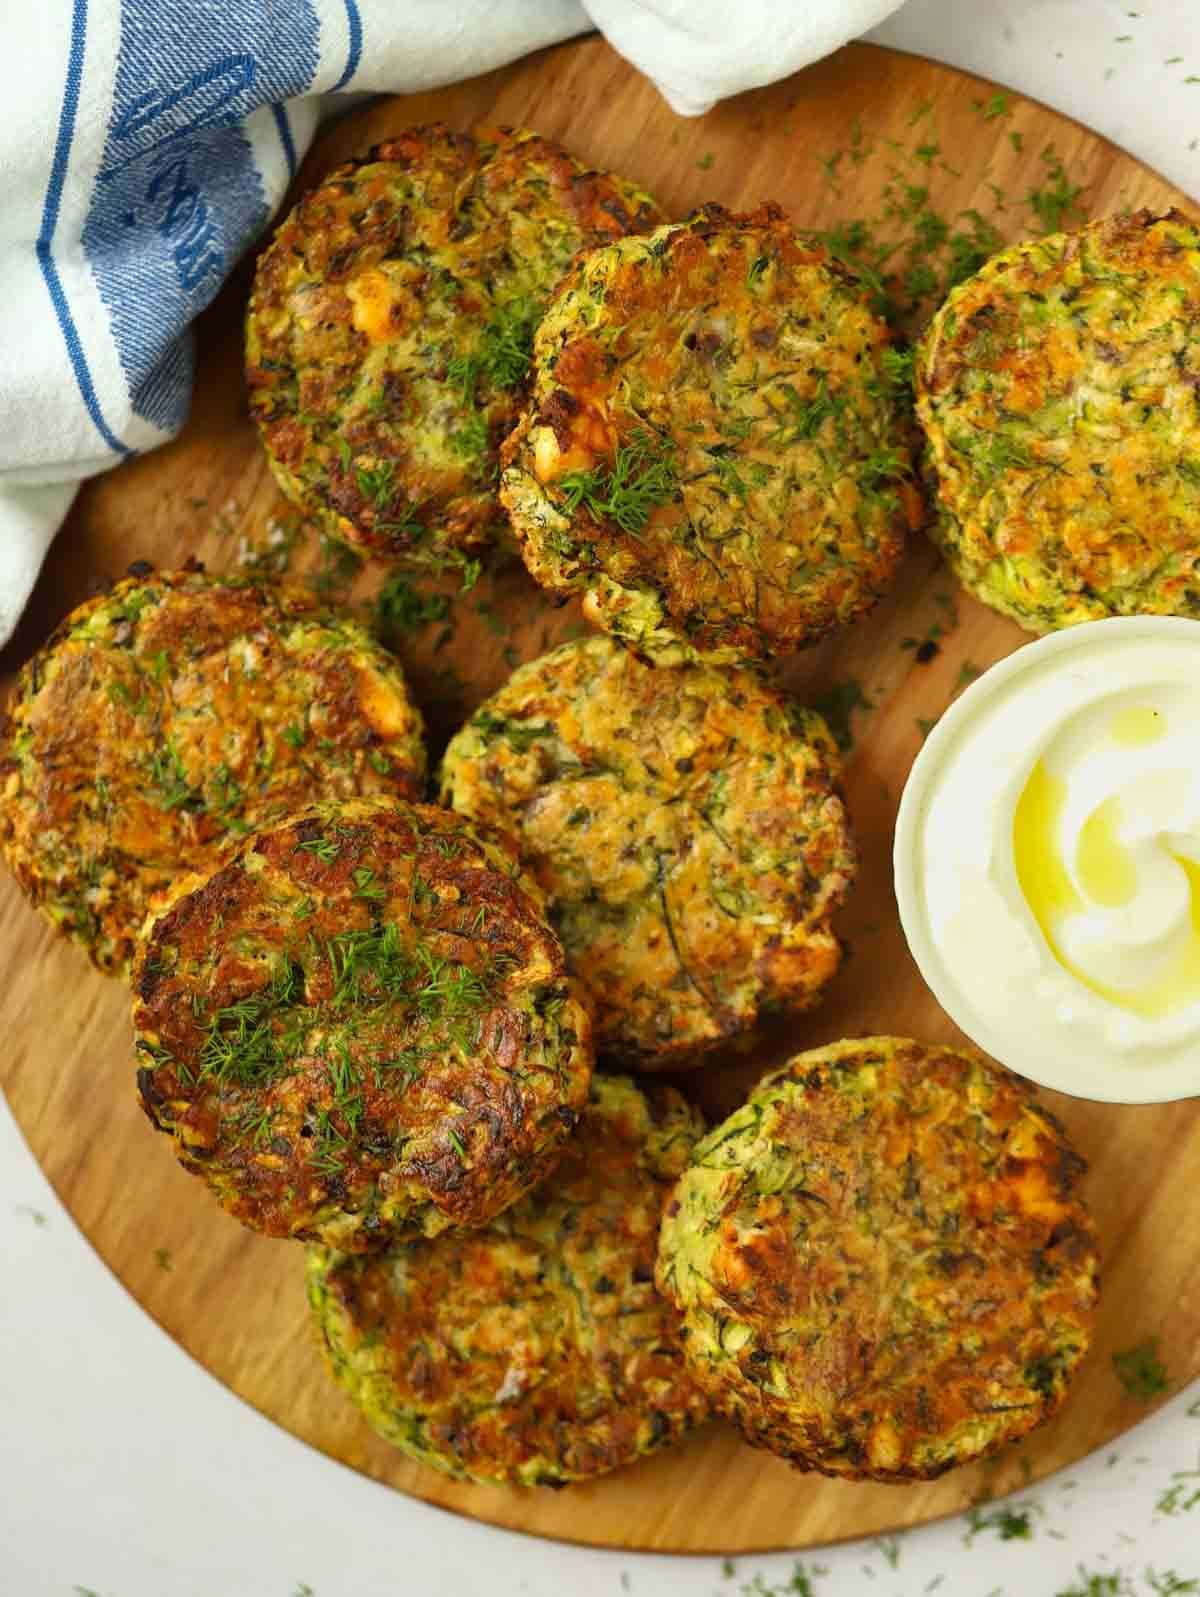 Eight round courgette fritters on a chopping board ready to eat.